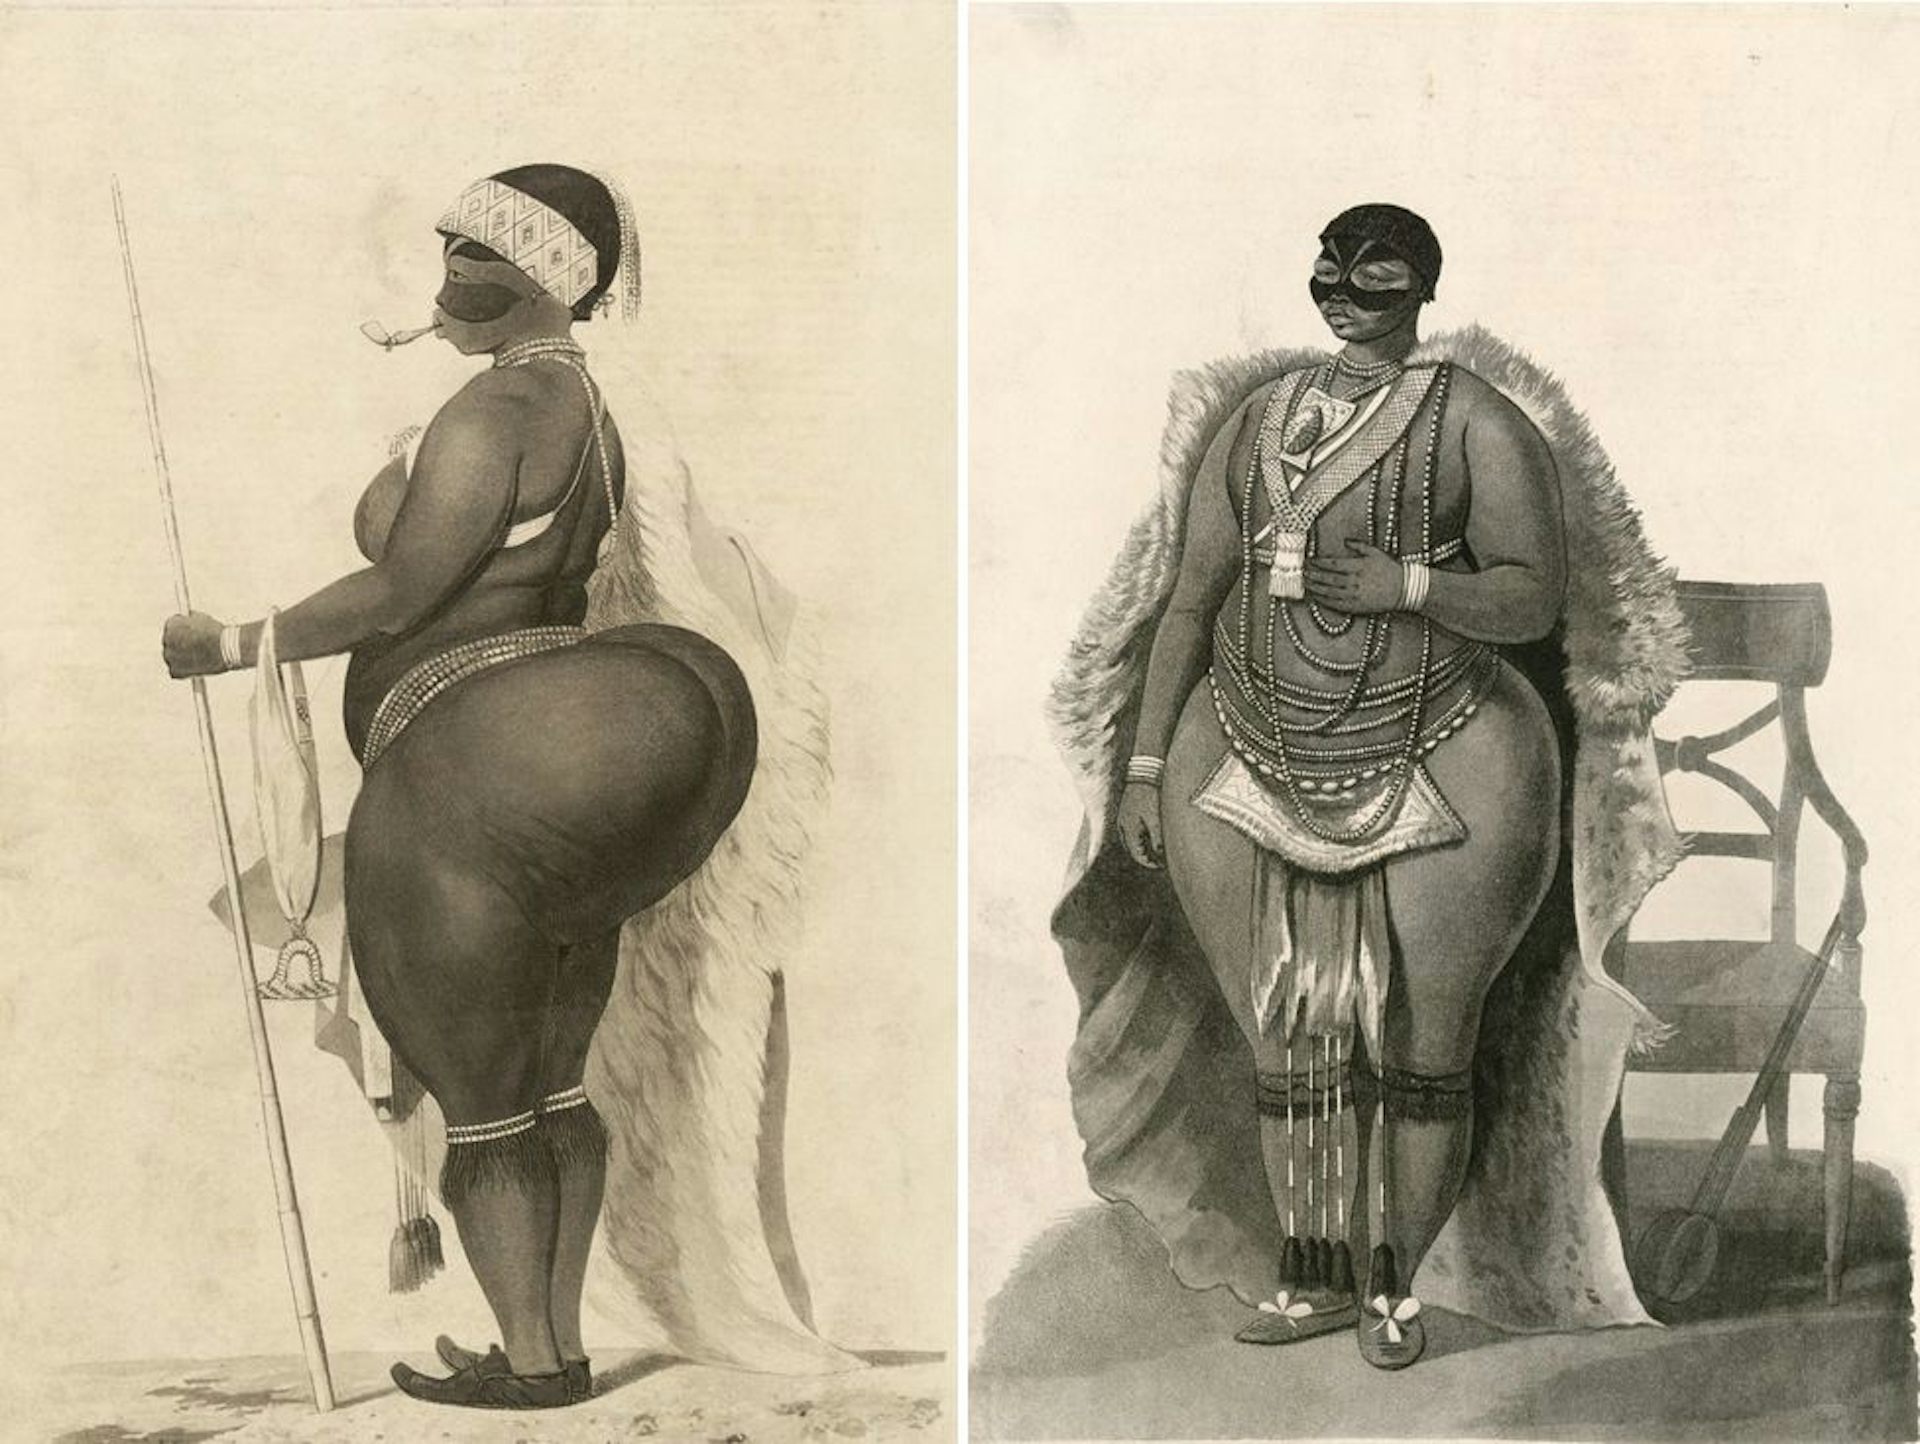 How Sarah Baartmans hips went from a symbol of exploitation to a source of empowerment for Black women pic